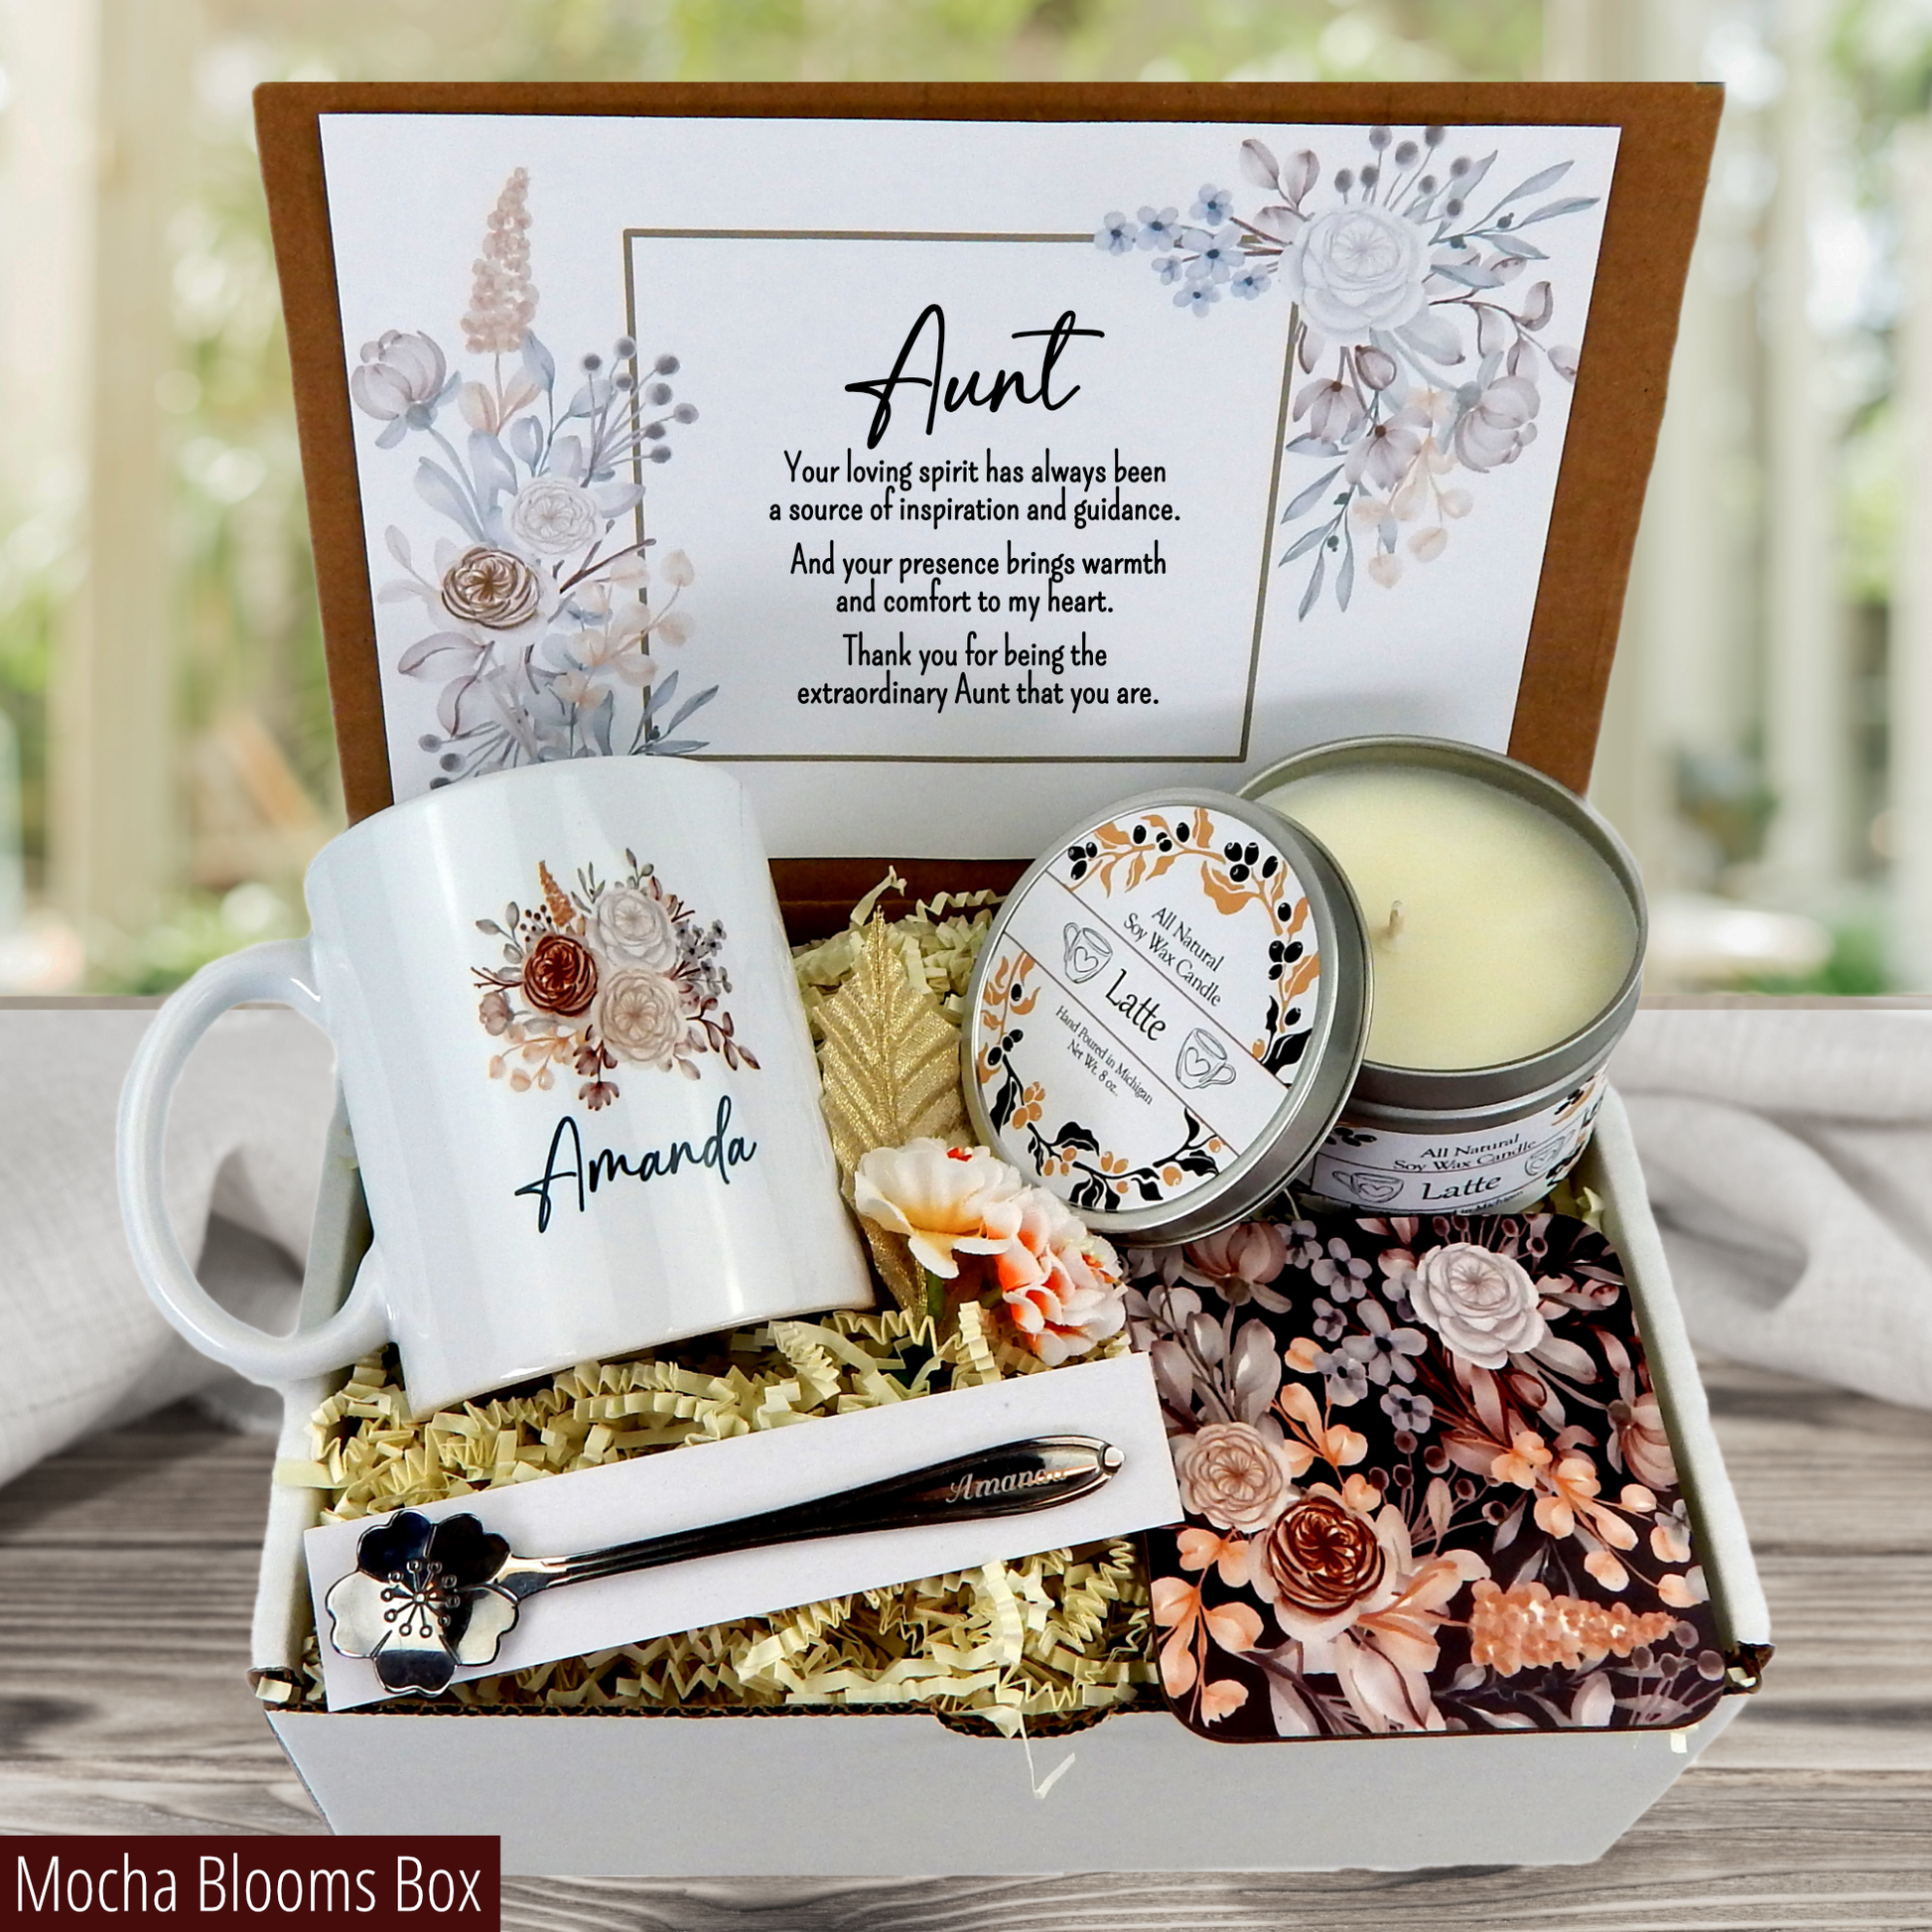 Extraordinary Personalized Gifts for Anyone